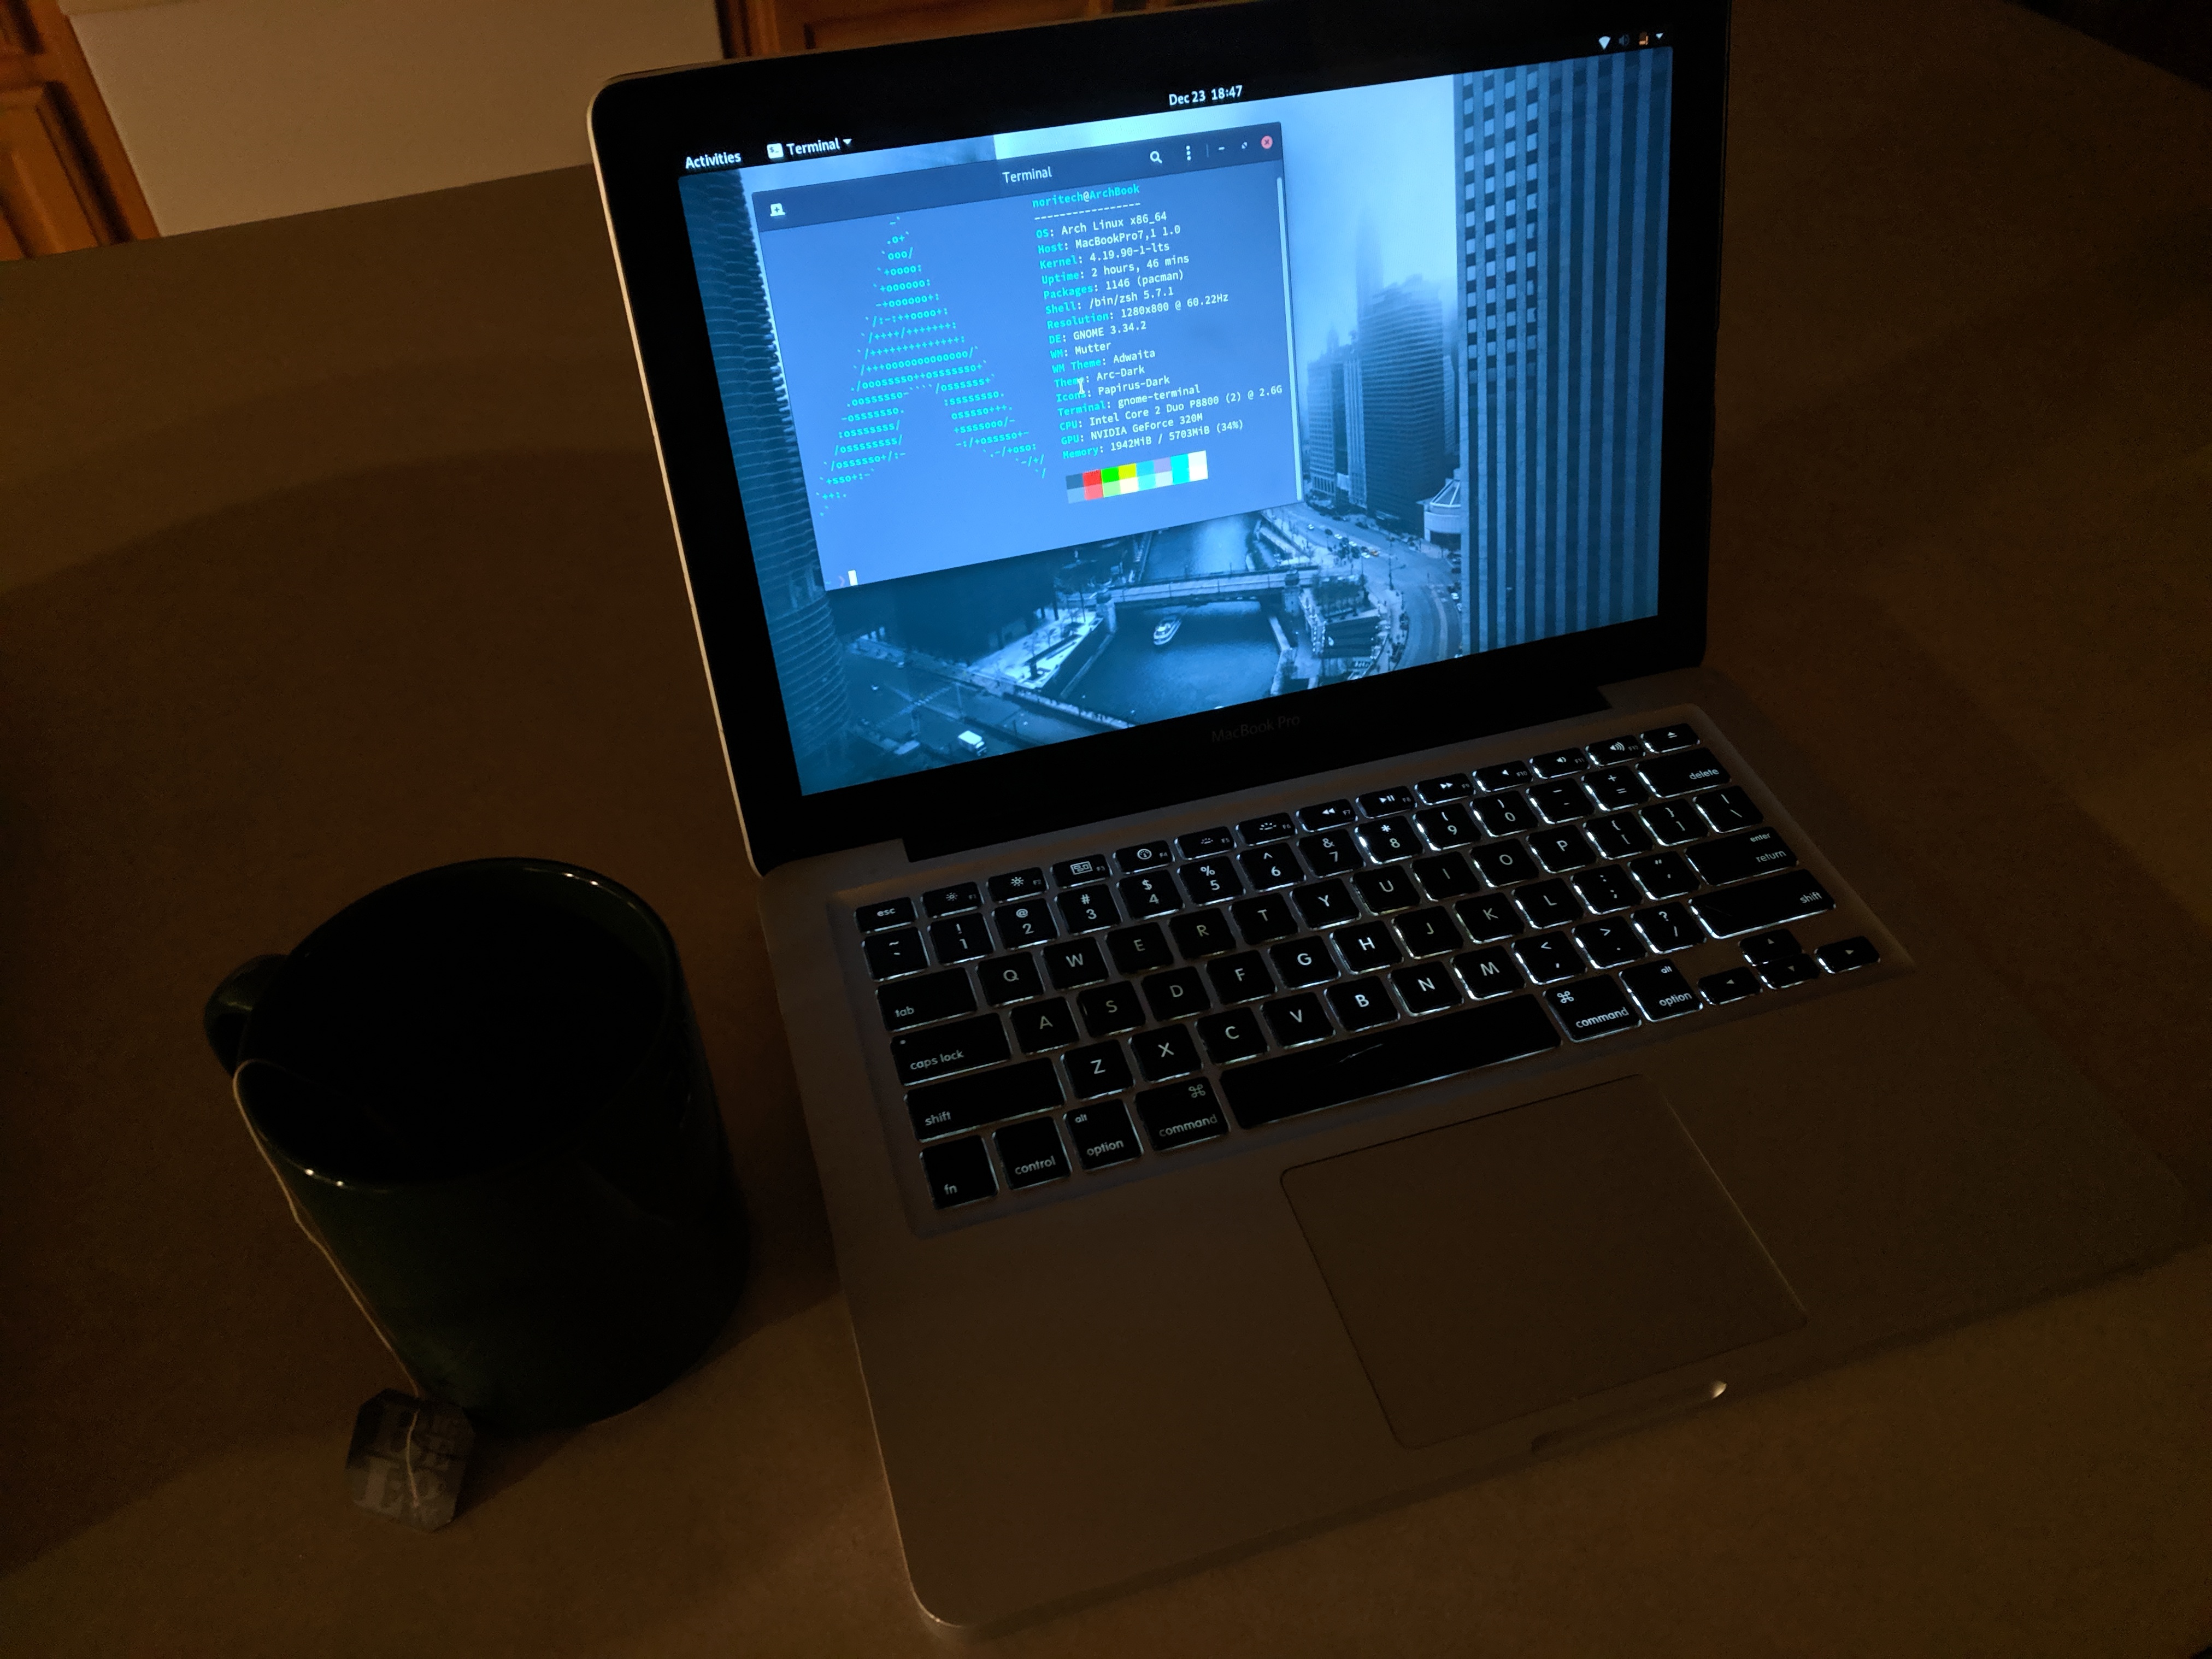 MBP running Arch